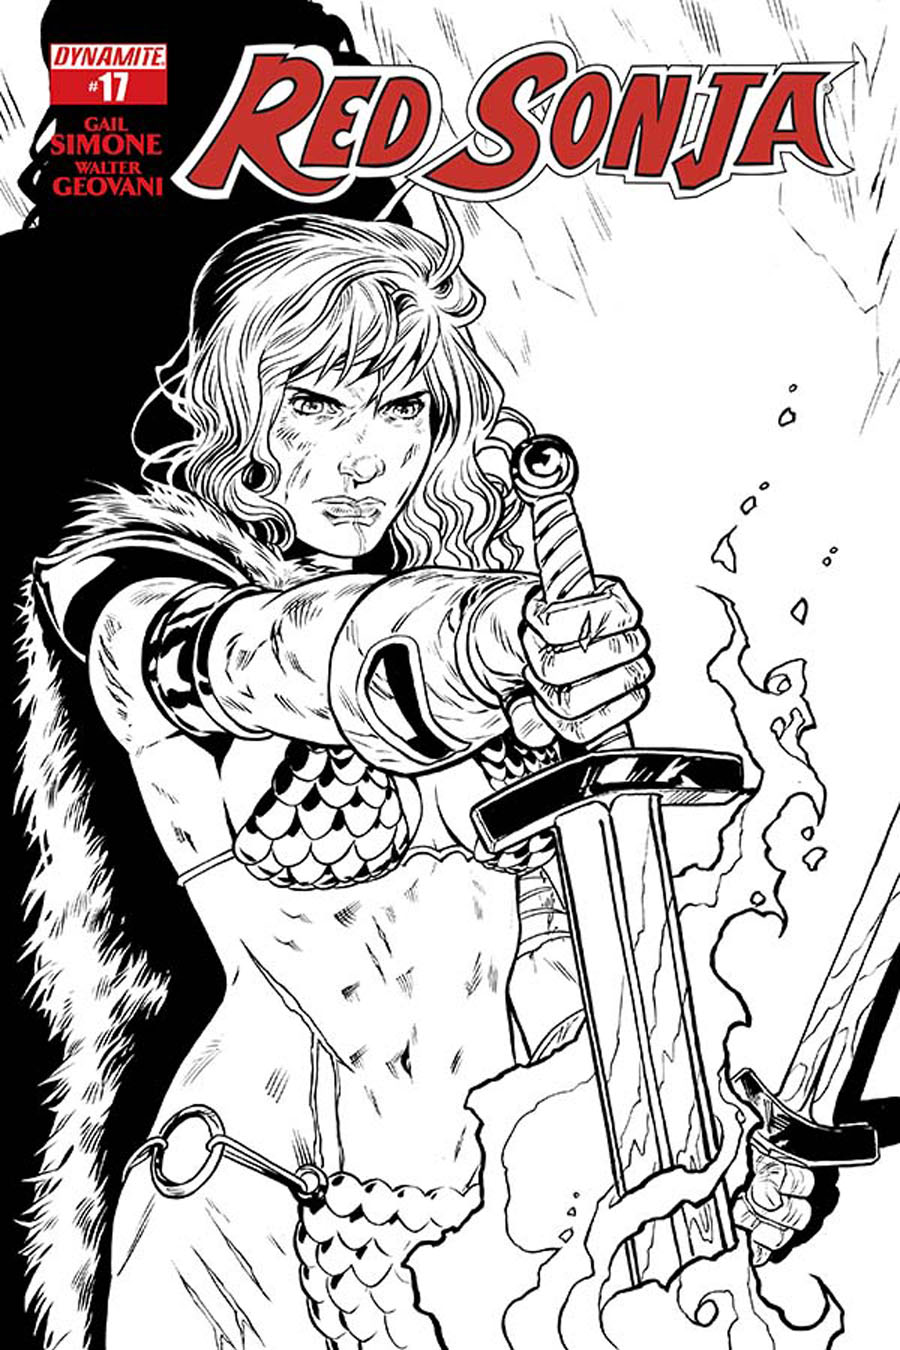 Red Sonja Vol 5 #17 Cover E Incentive Rebekah Isaacs Black & White Cover